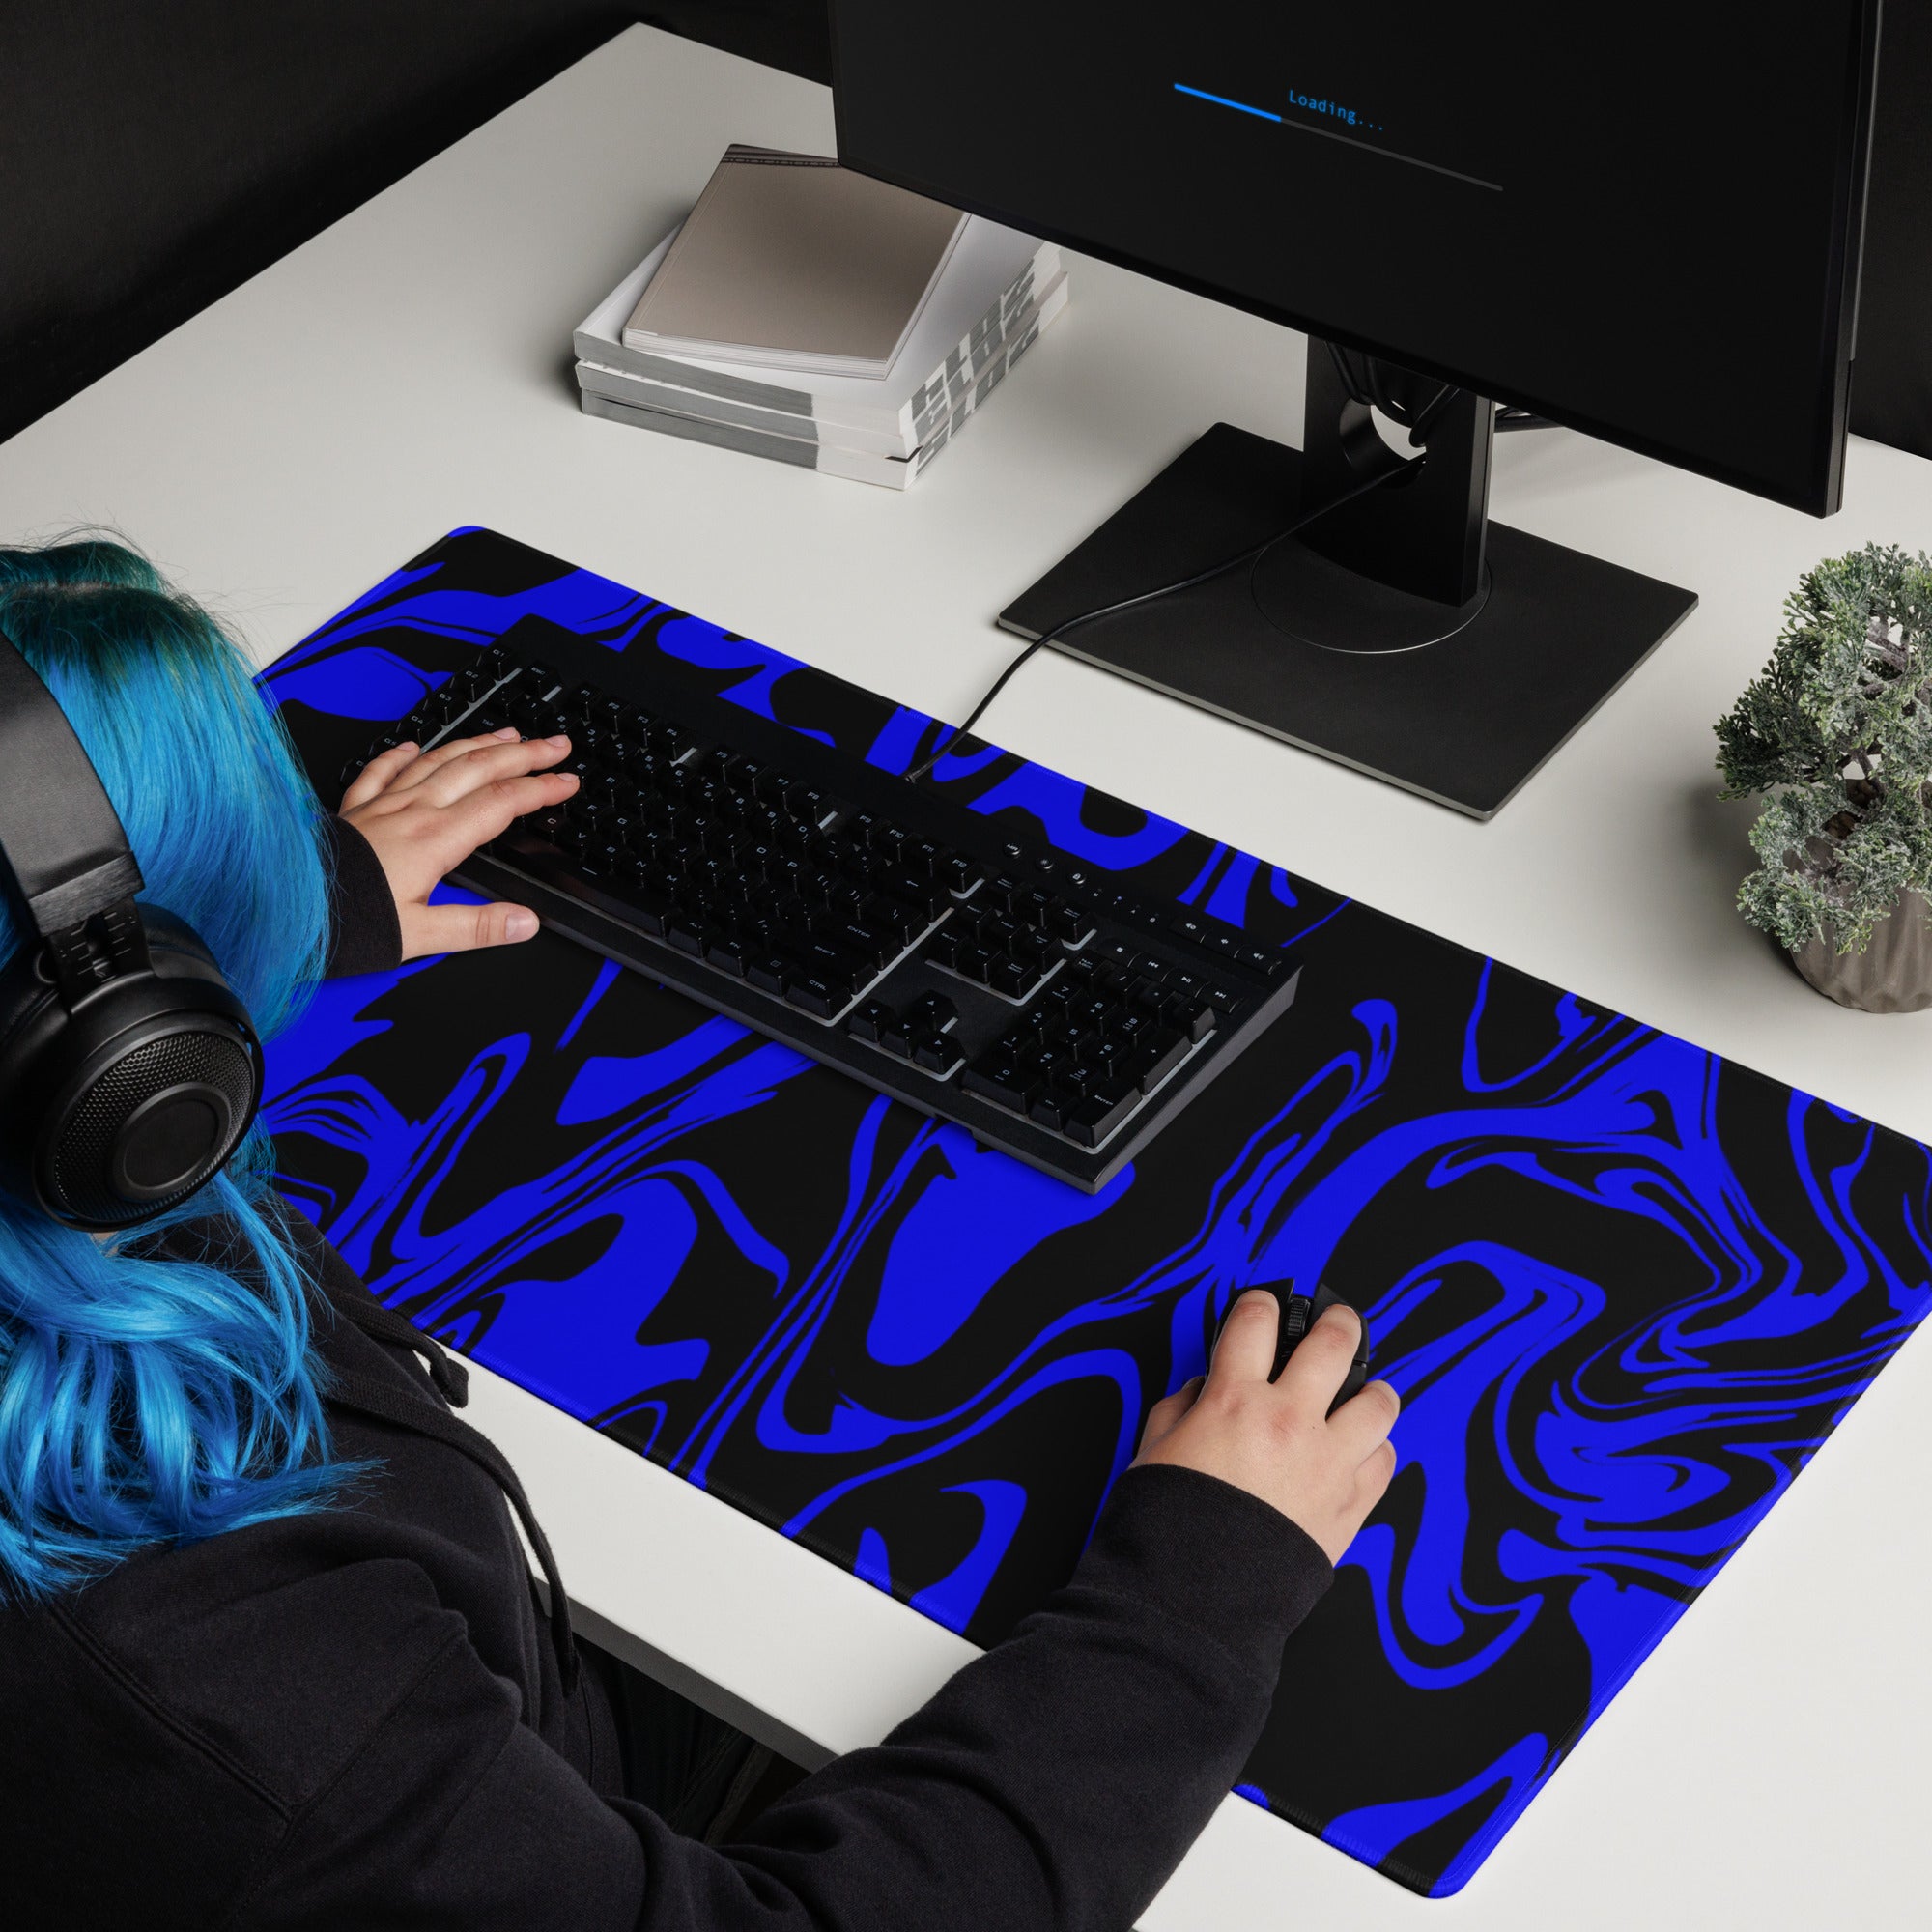 Impression sur toile Gaming Technology - Game Pad on a Dark Blue